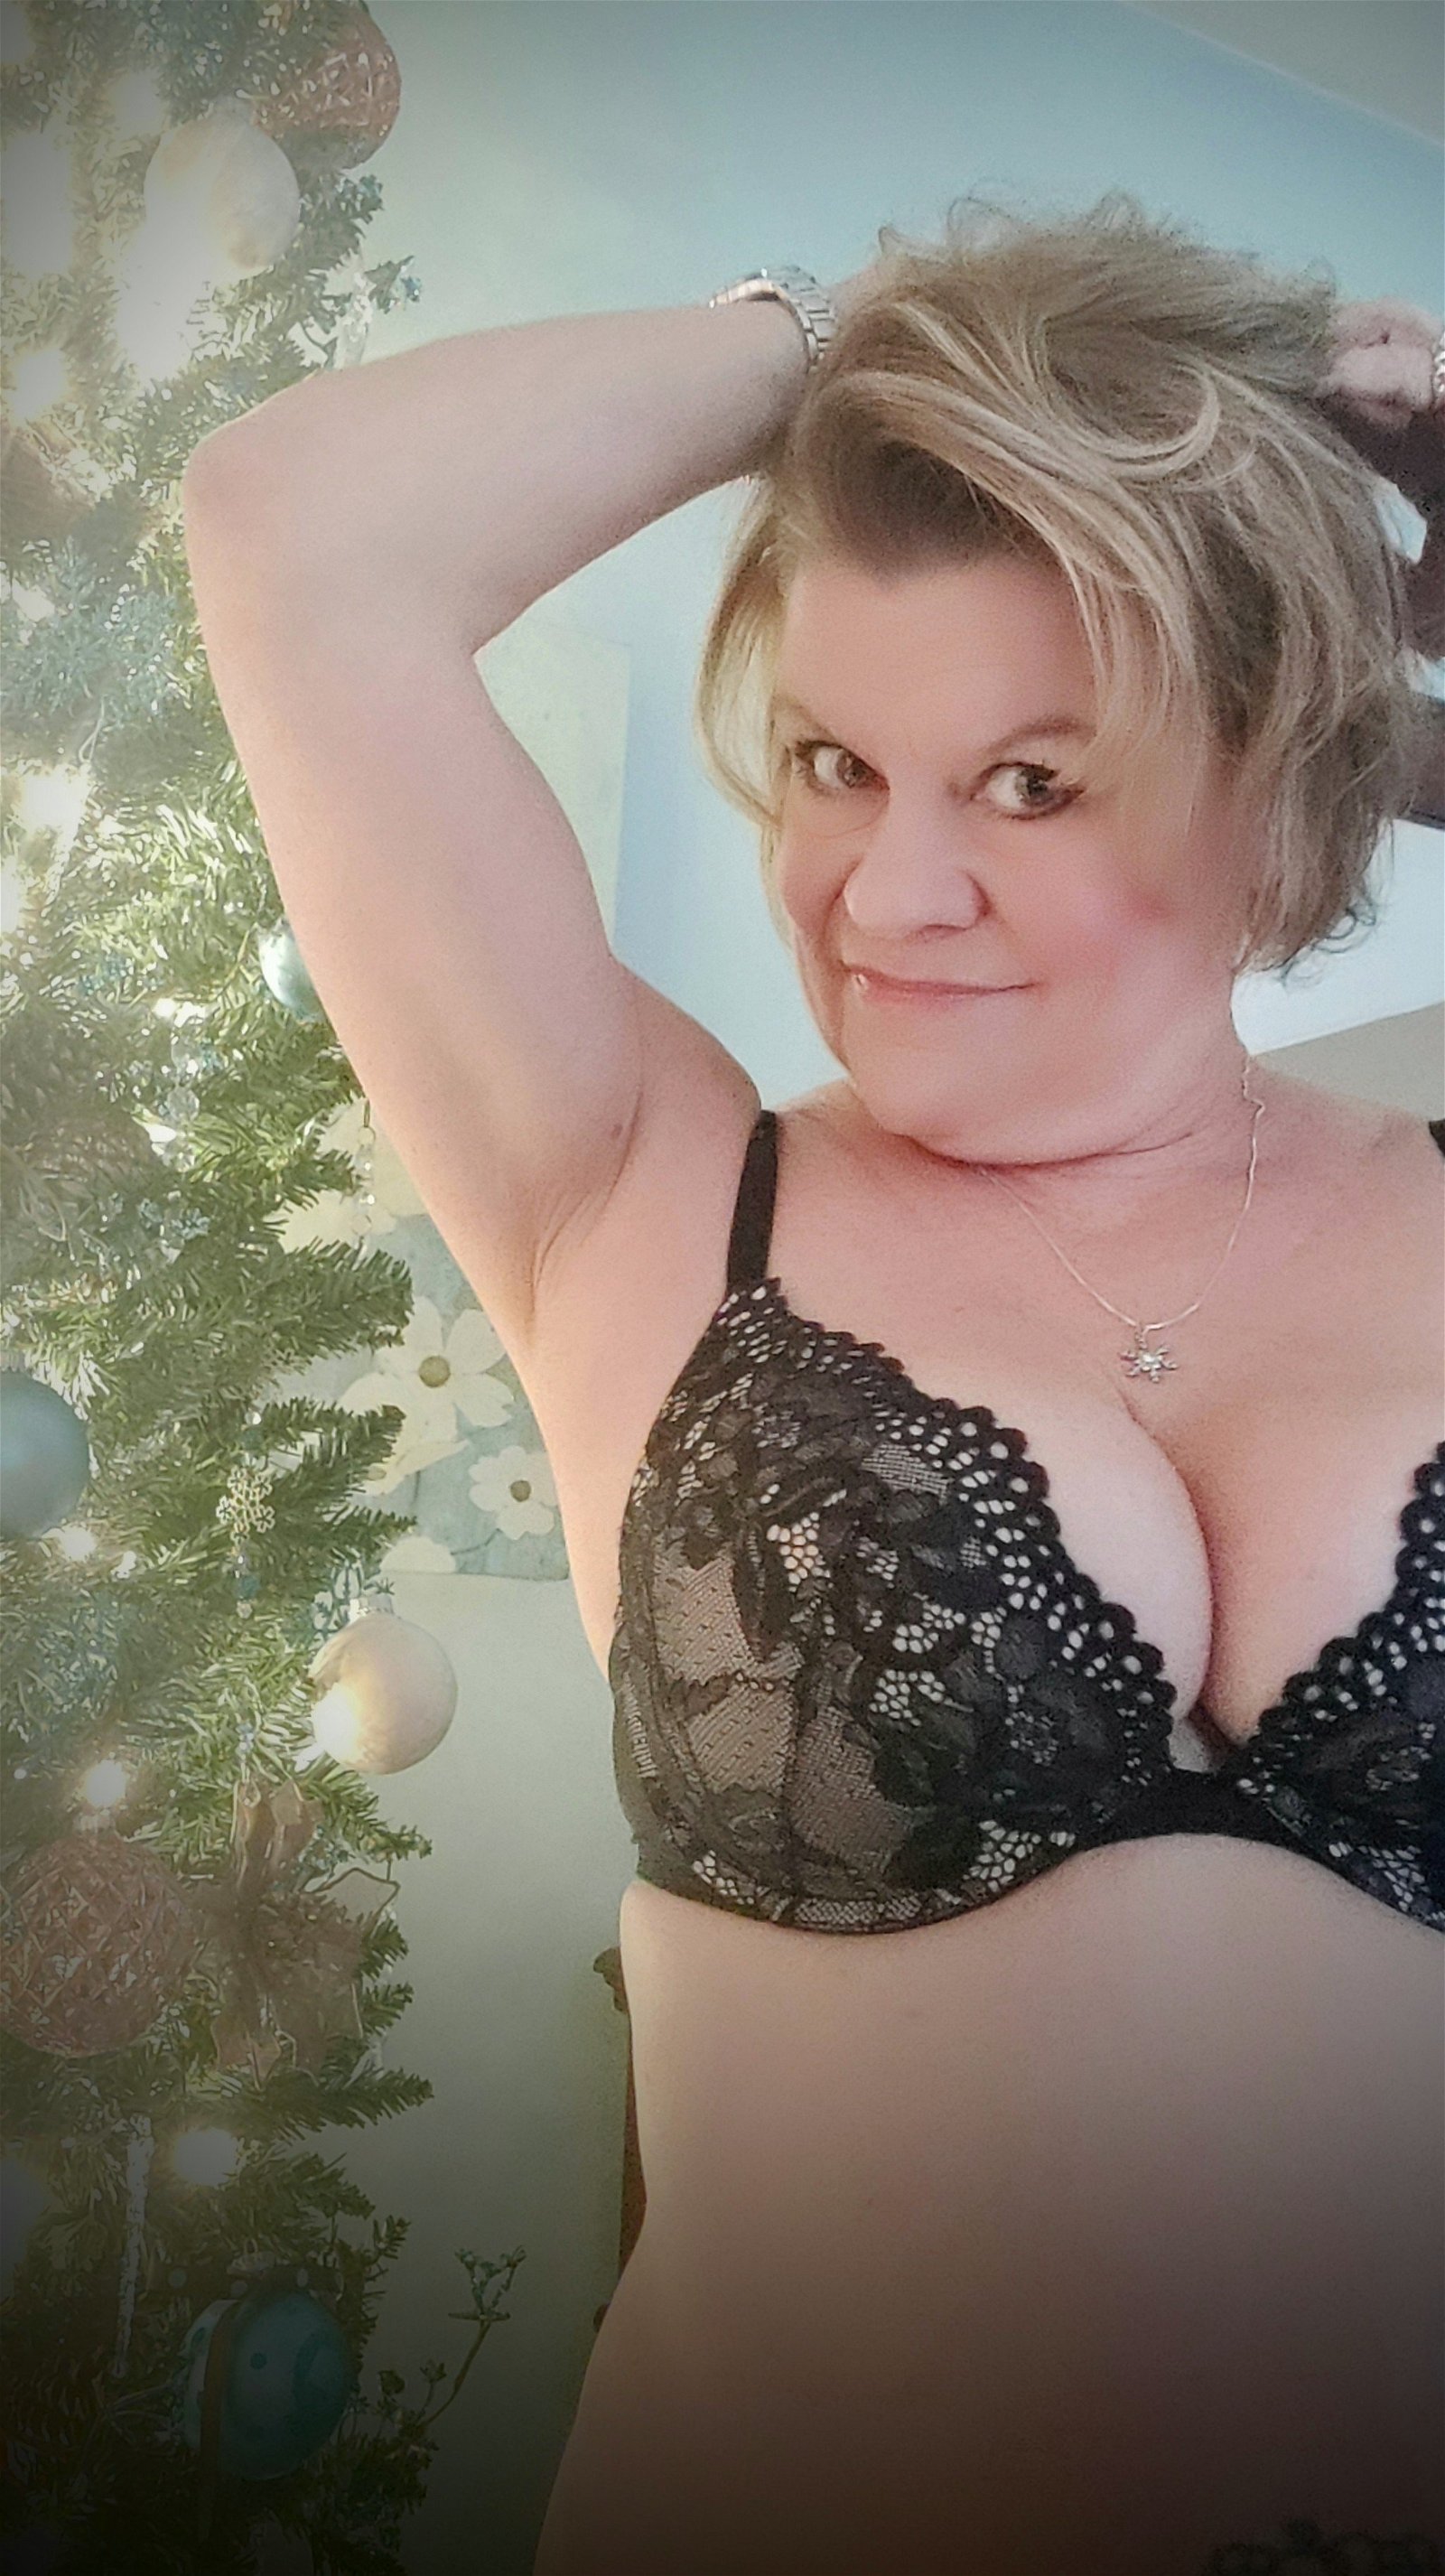 Photo by Brittanybitch4u with the username @Brittanybitch4u, who is a star user, posted on December 29, 2023. The post is about the topic MILF and the text says 'Merry Christmas 🎄
Check me out on FrontFanz!
https://frontfanz.com/profile/Brittanybitch4u'